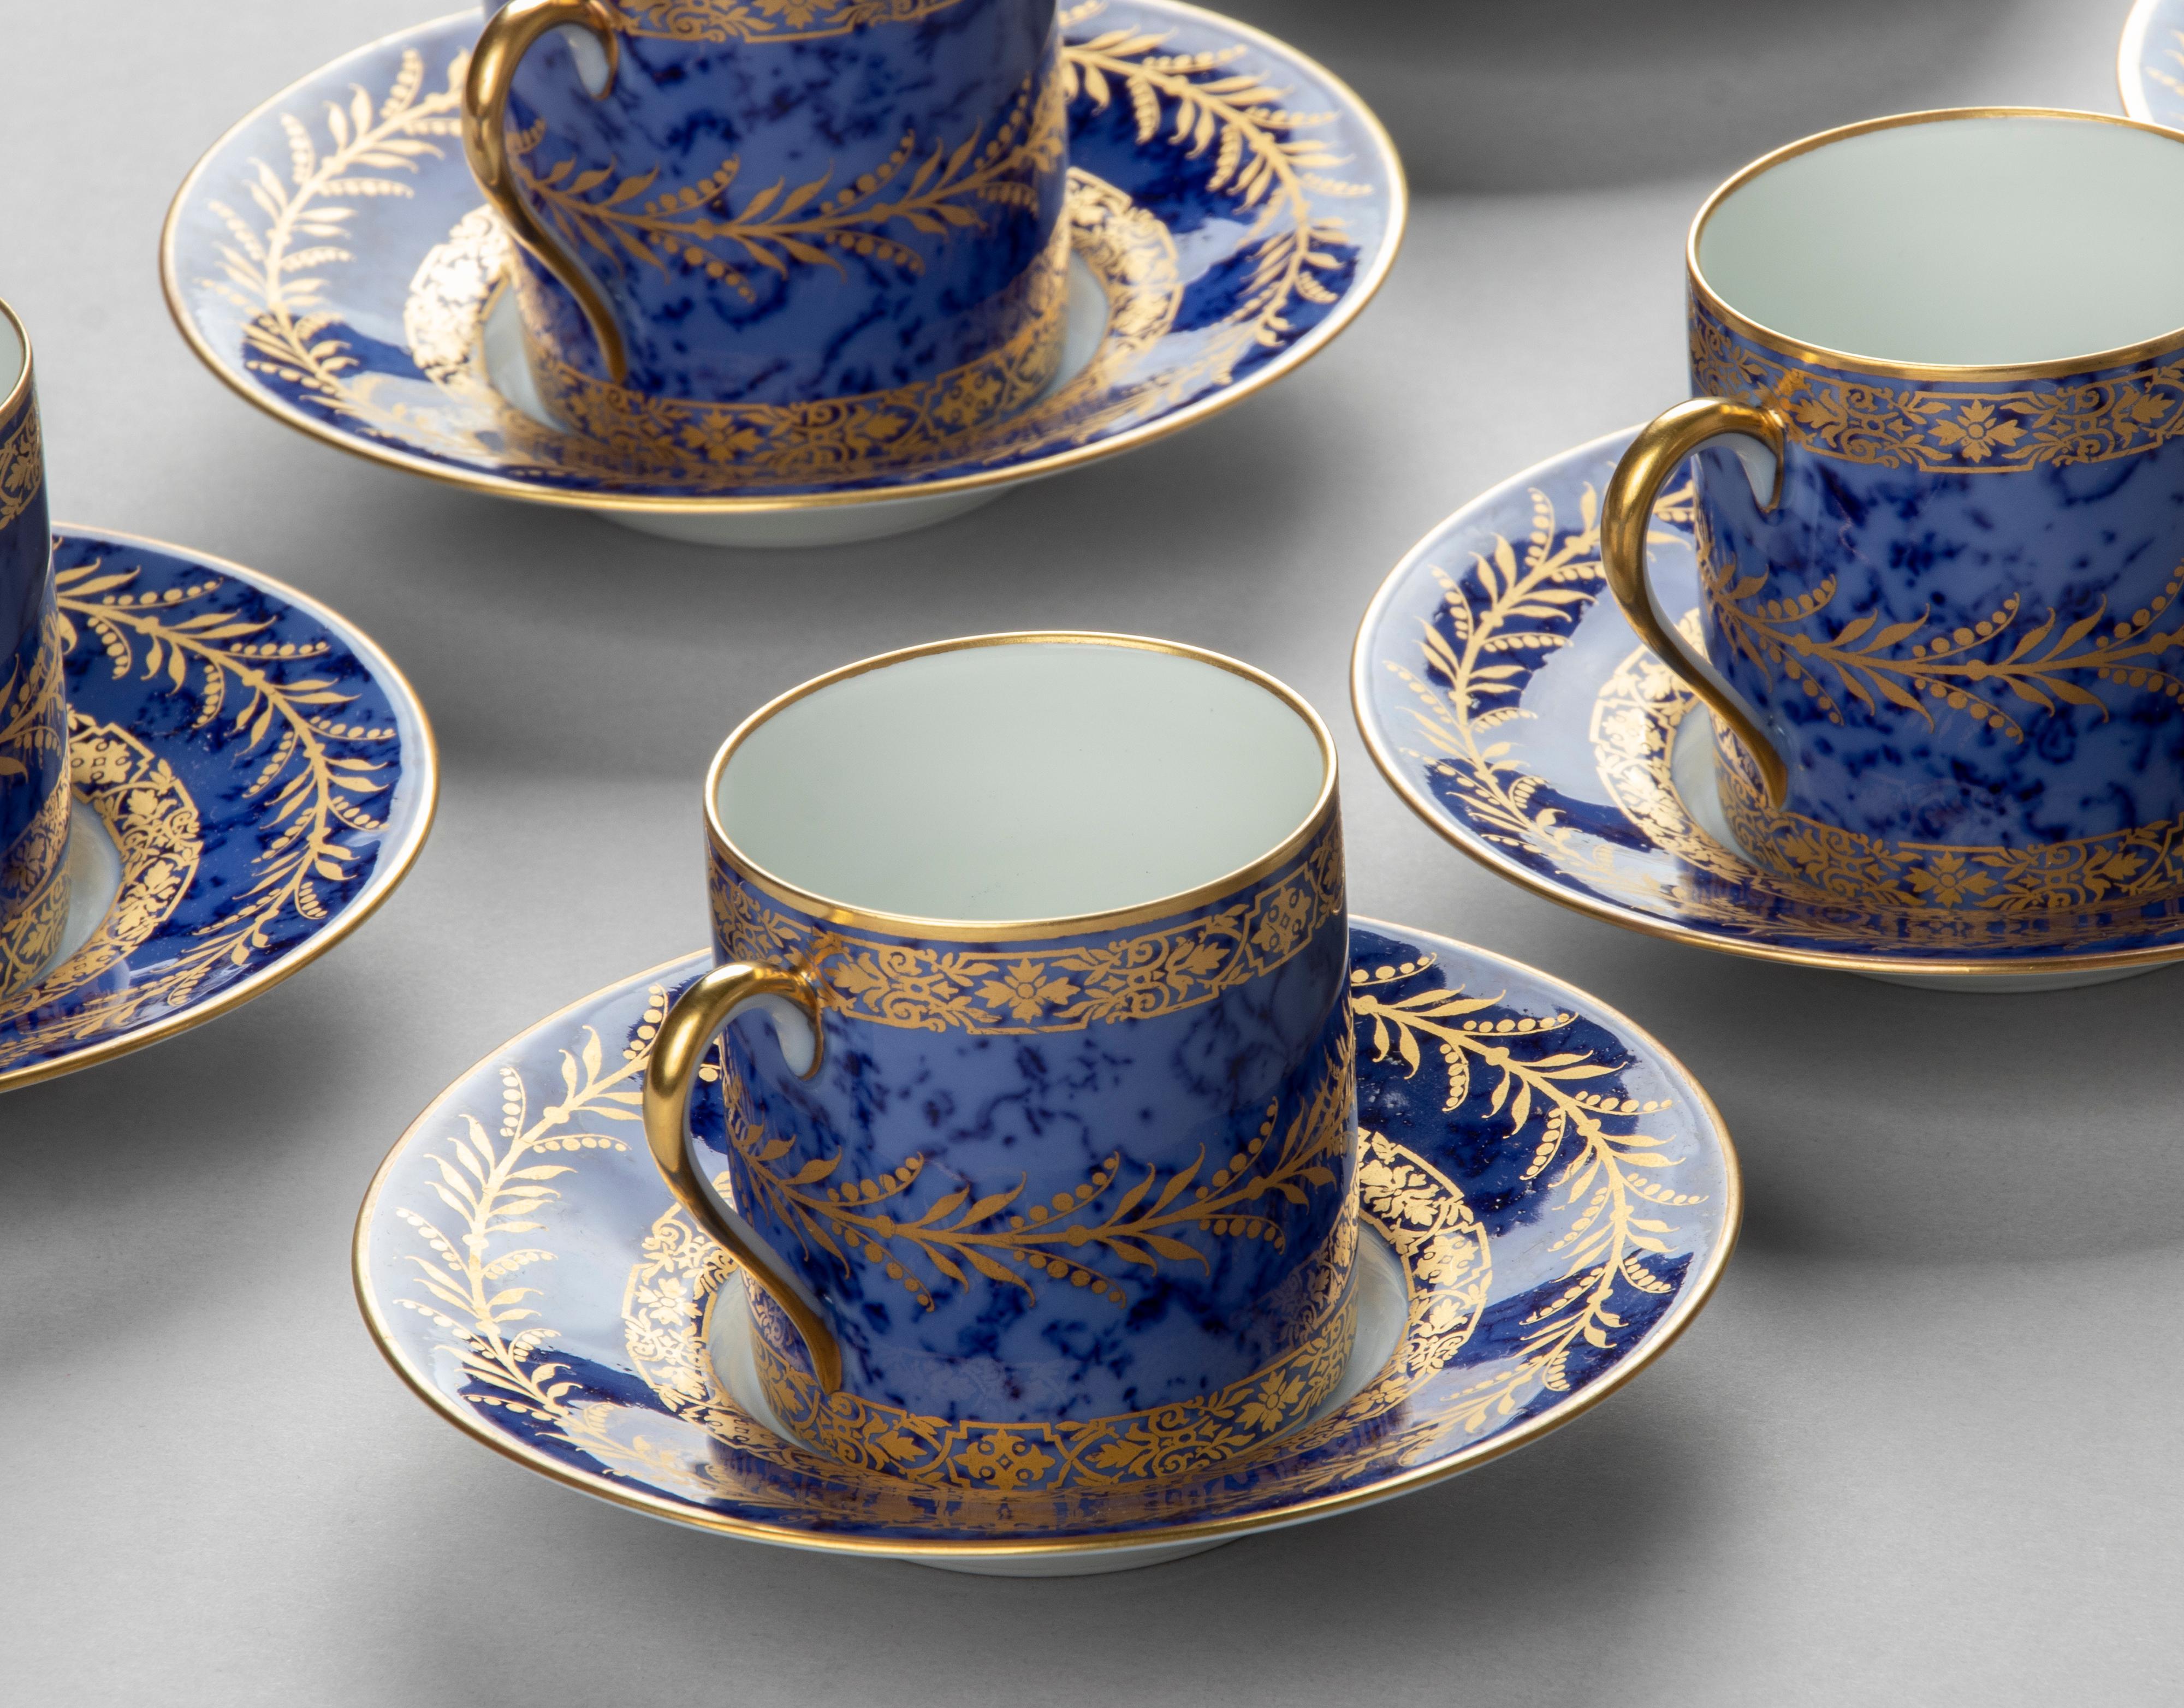 20-Piece Porcelain Tea Set Made by Raynaud Limoges 12